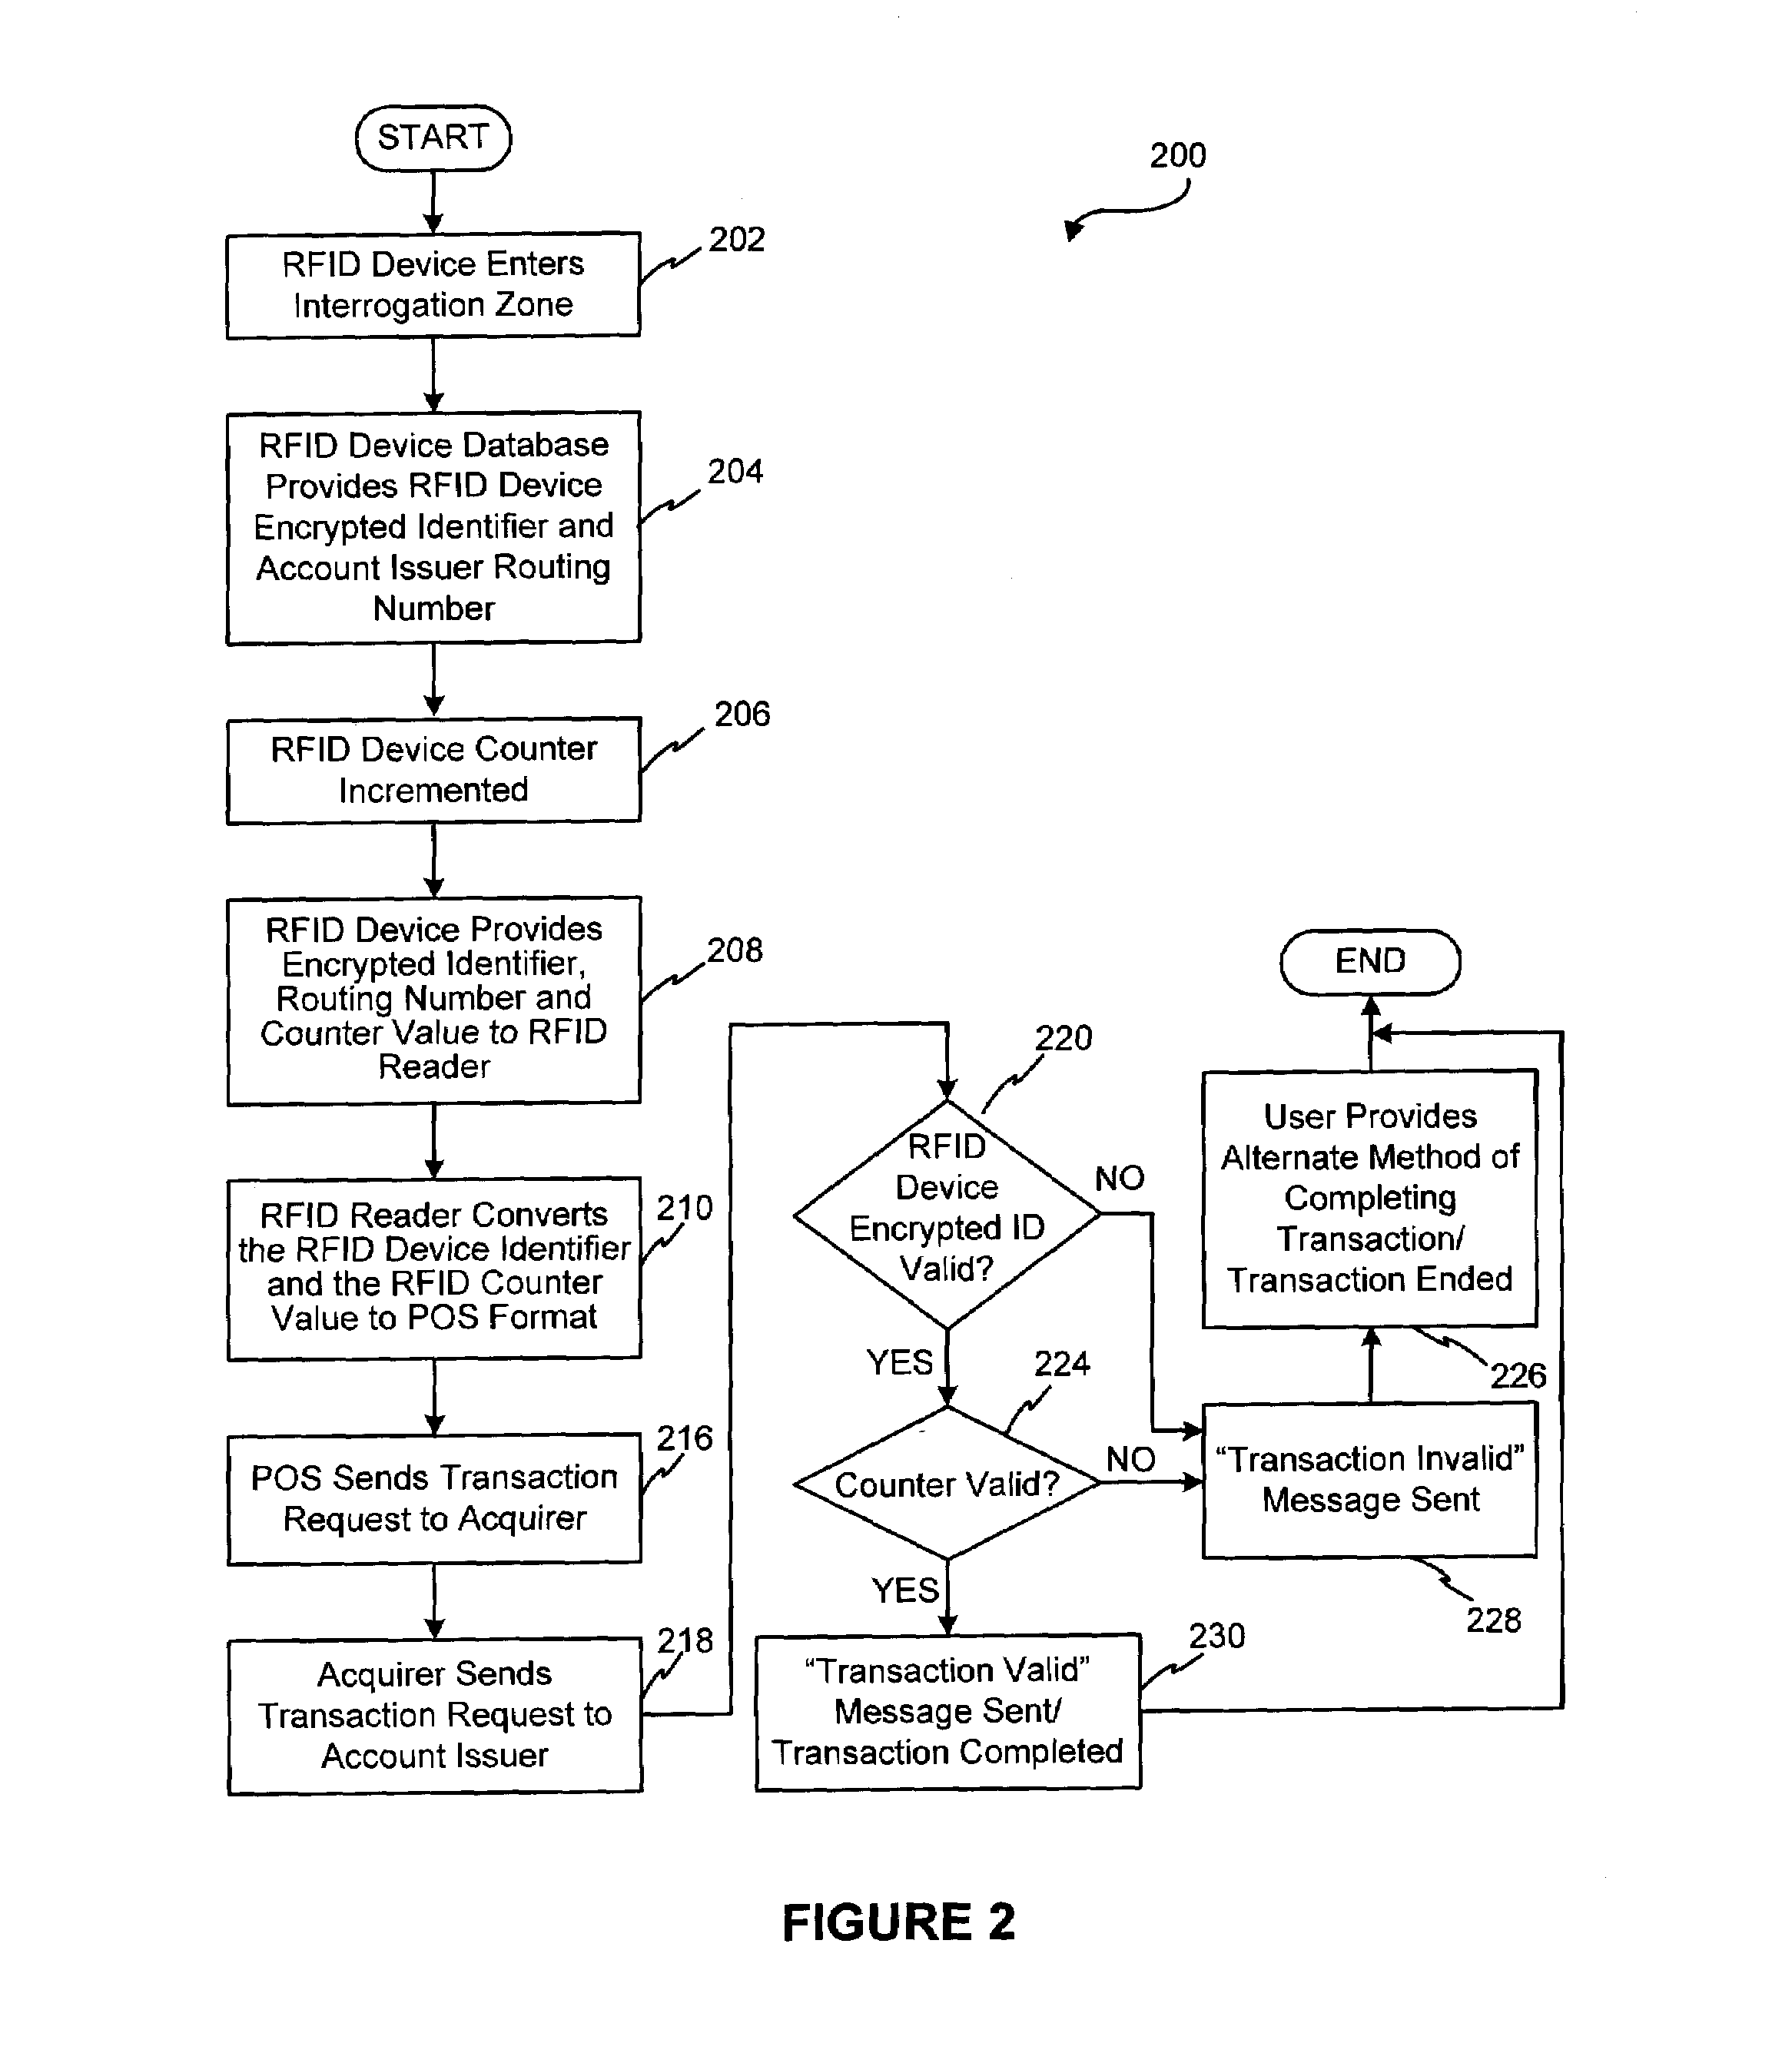 System and method for authenticating a RF transaction using a transaction account routing number